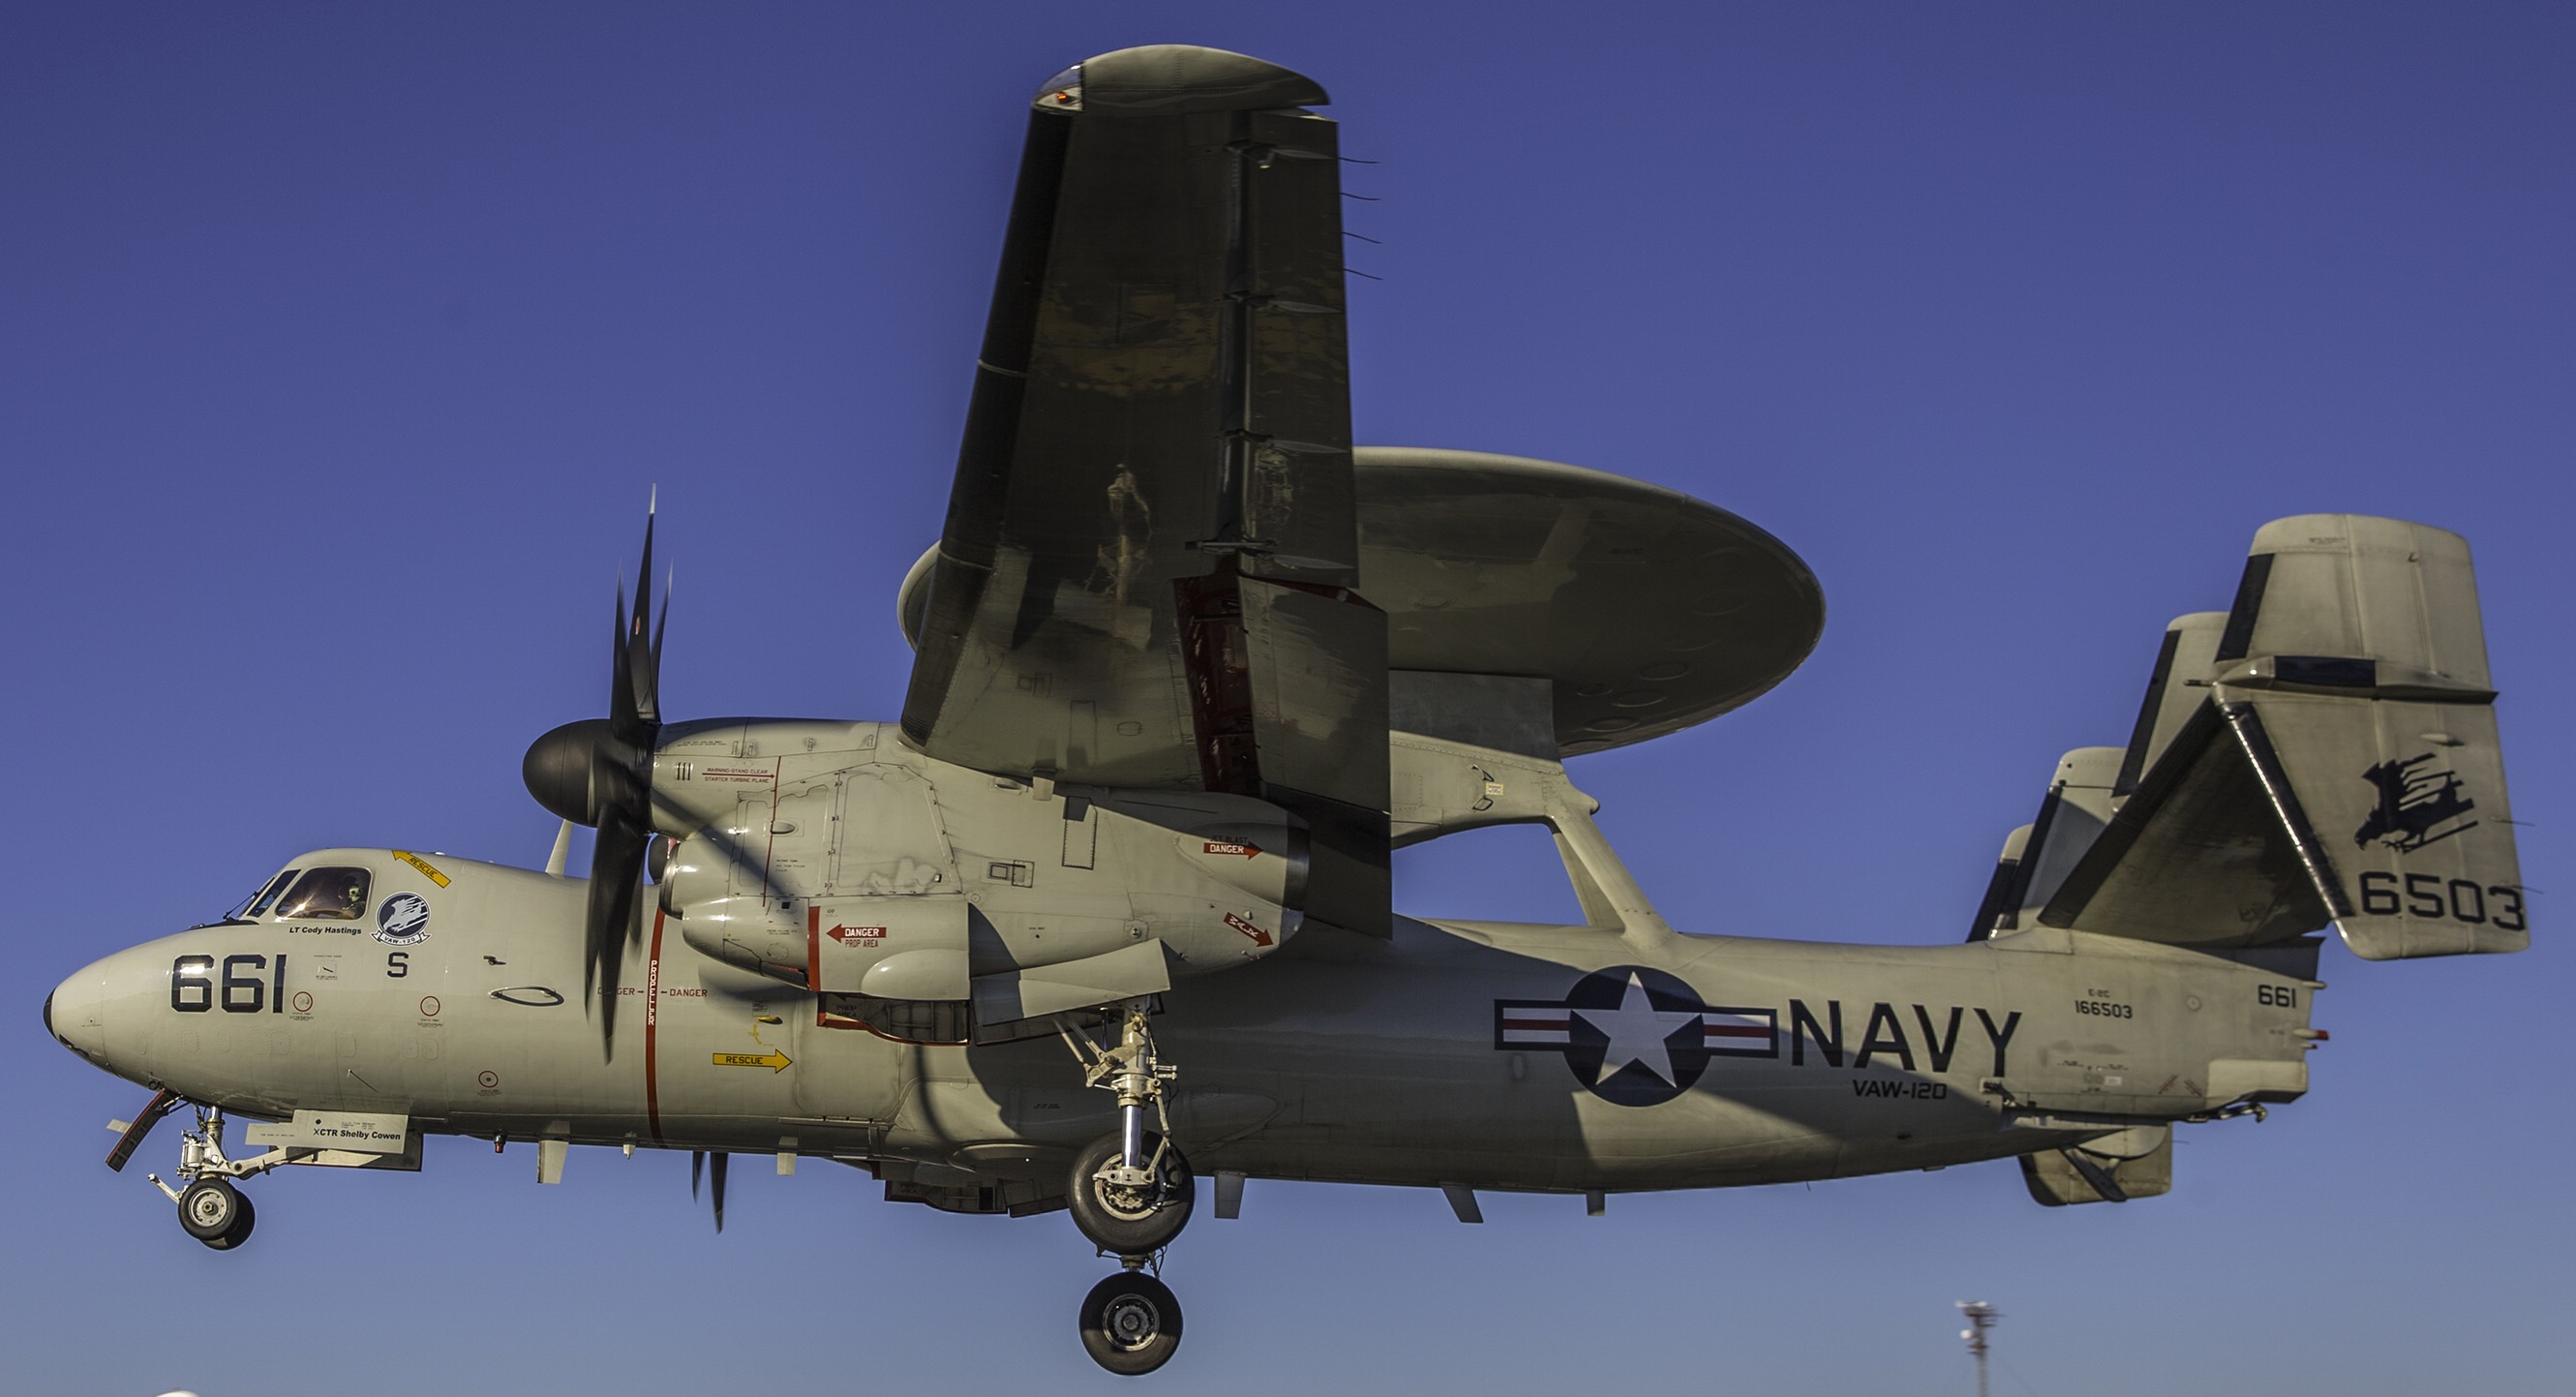 vaw-120 greyhawks carrier airborne early warning squadron e-2c hawkeye replacement nas norfolk virginia 80